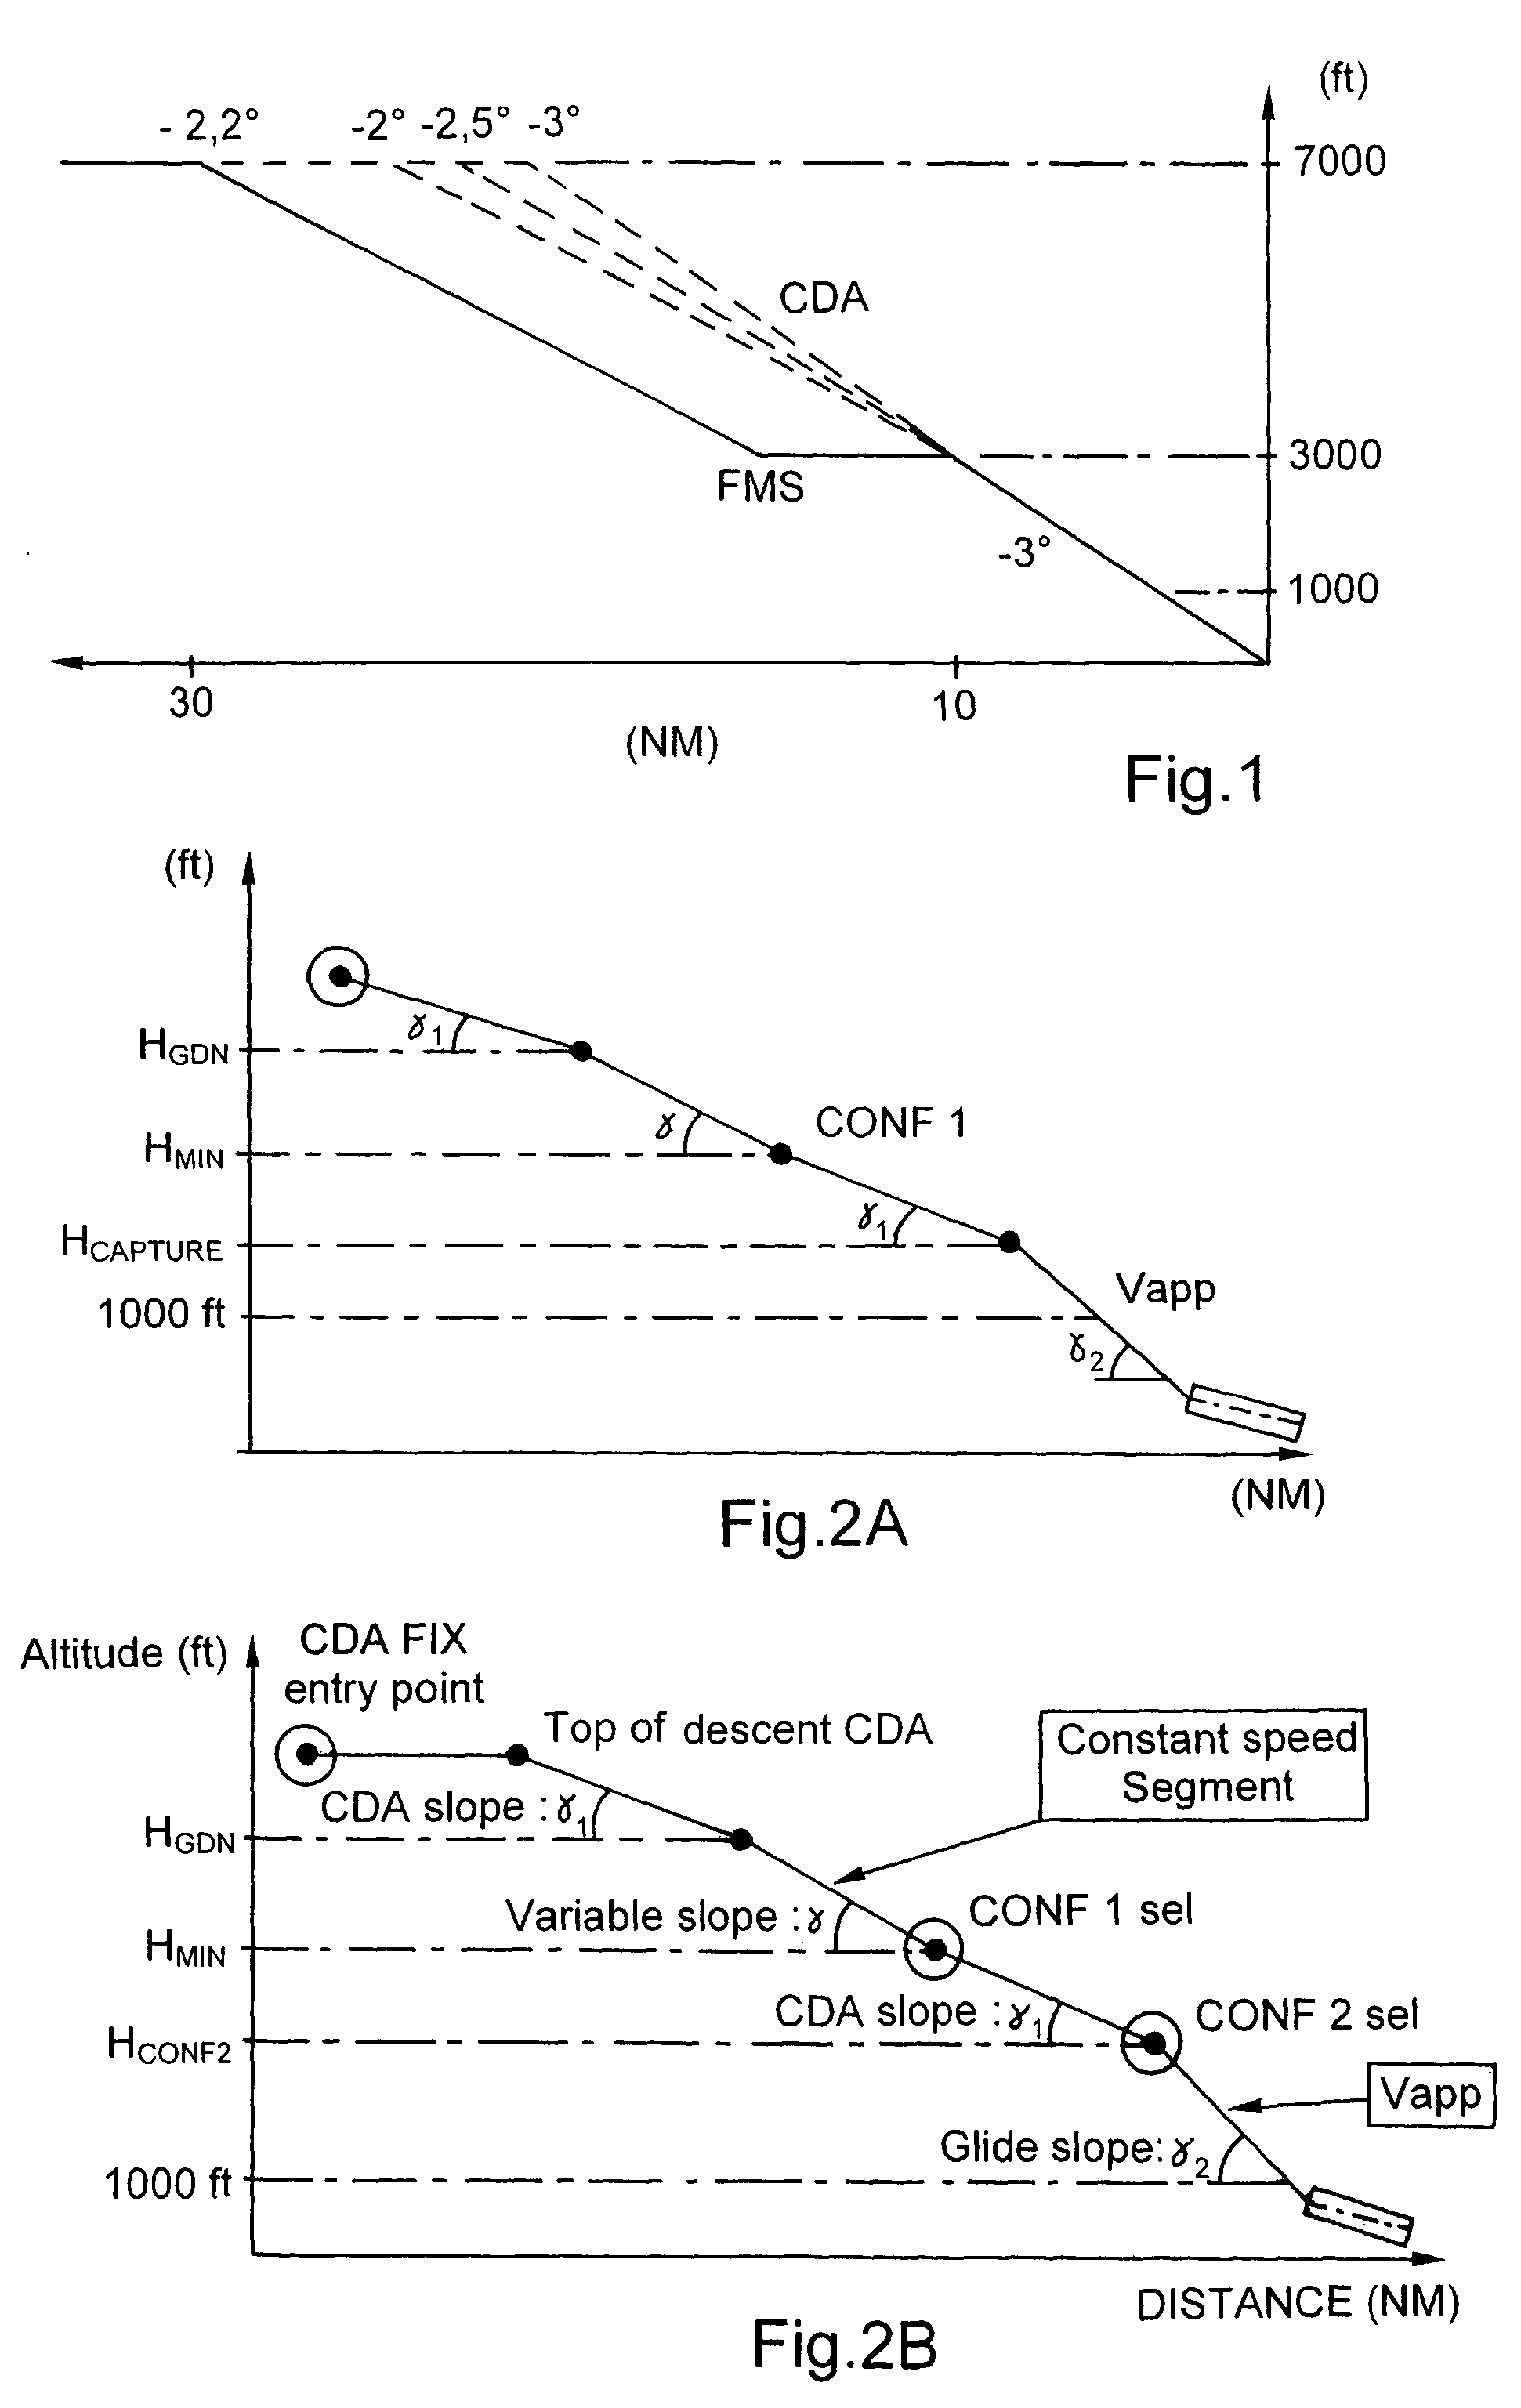 Navigation system for an aircraft and associated command process